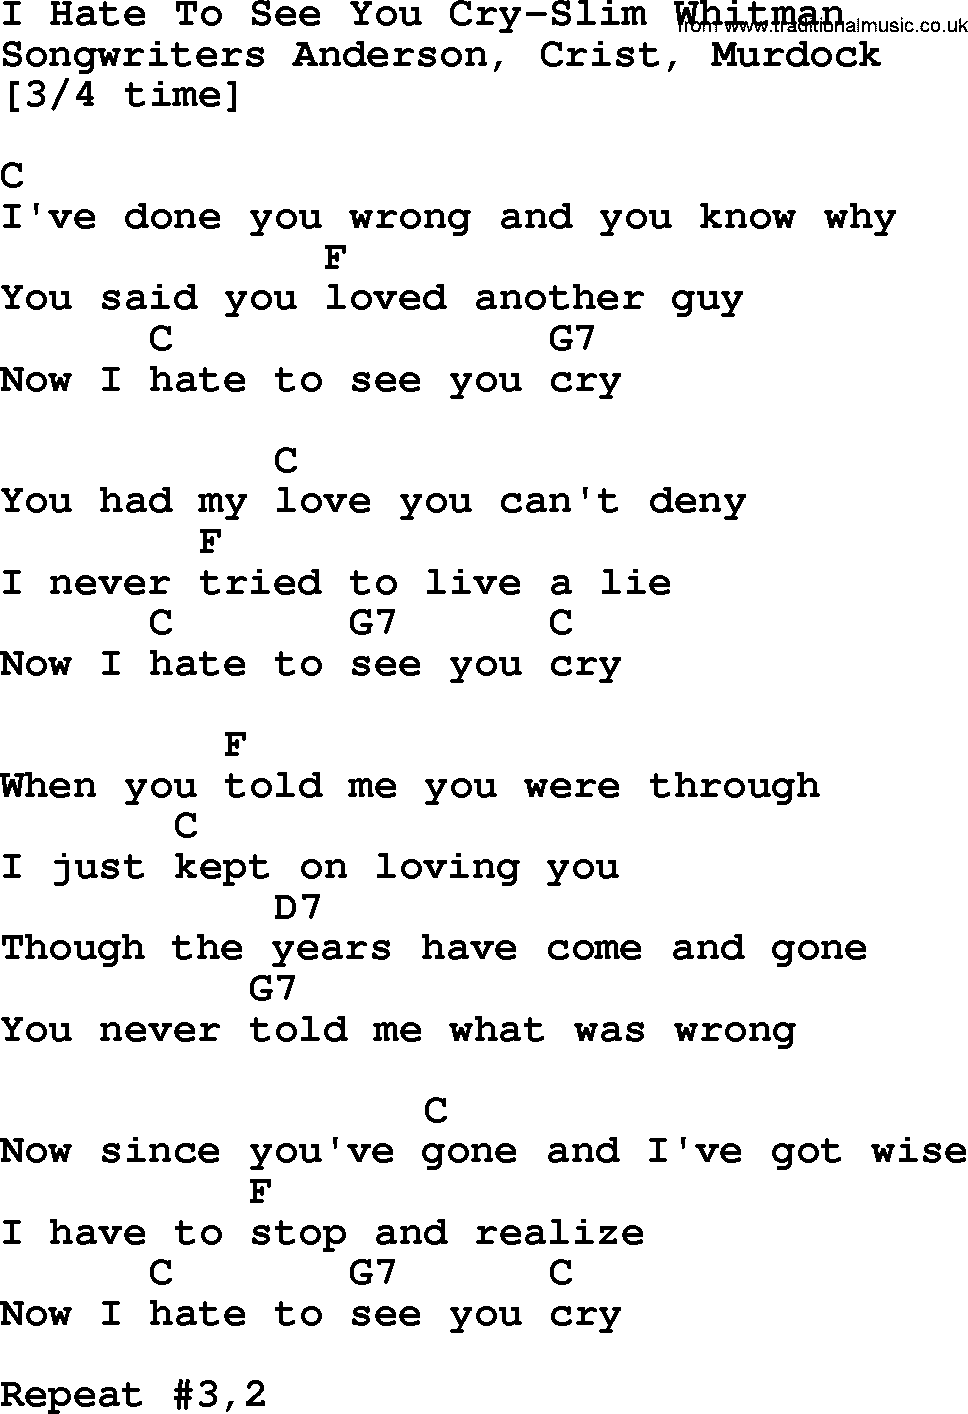 Country music song: I Hate To See You Cry-Slim Whitman lyrics and chords